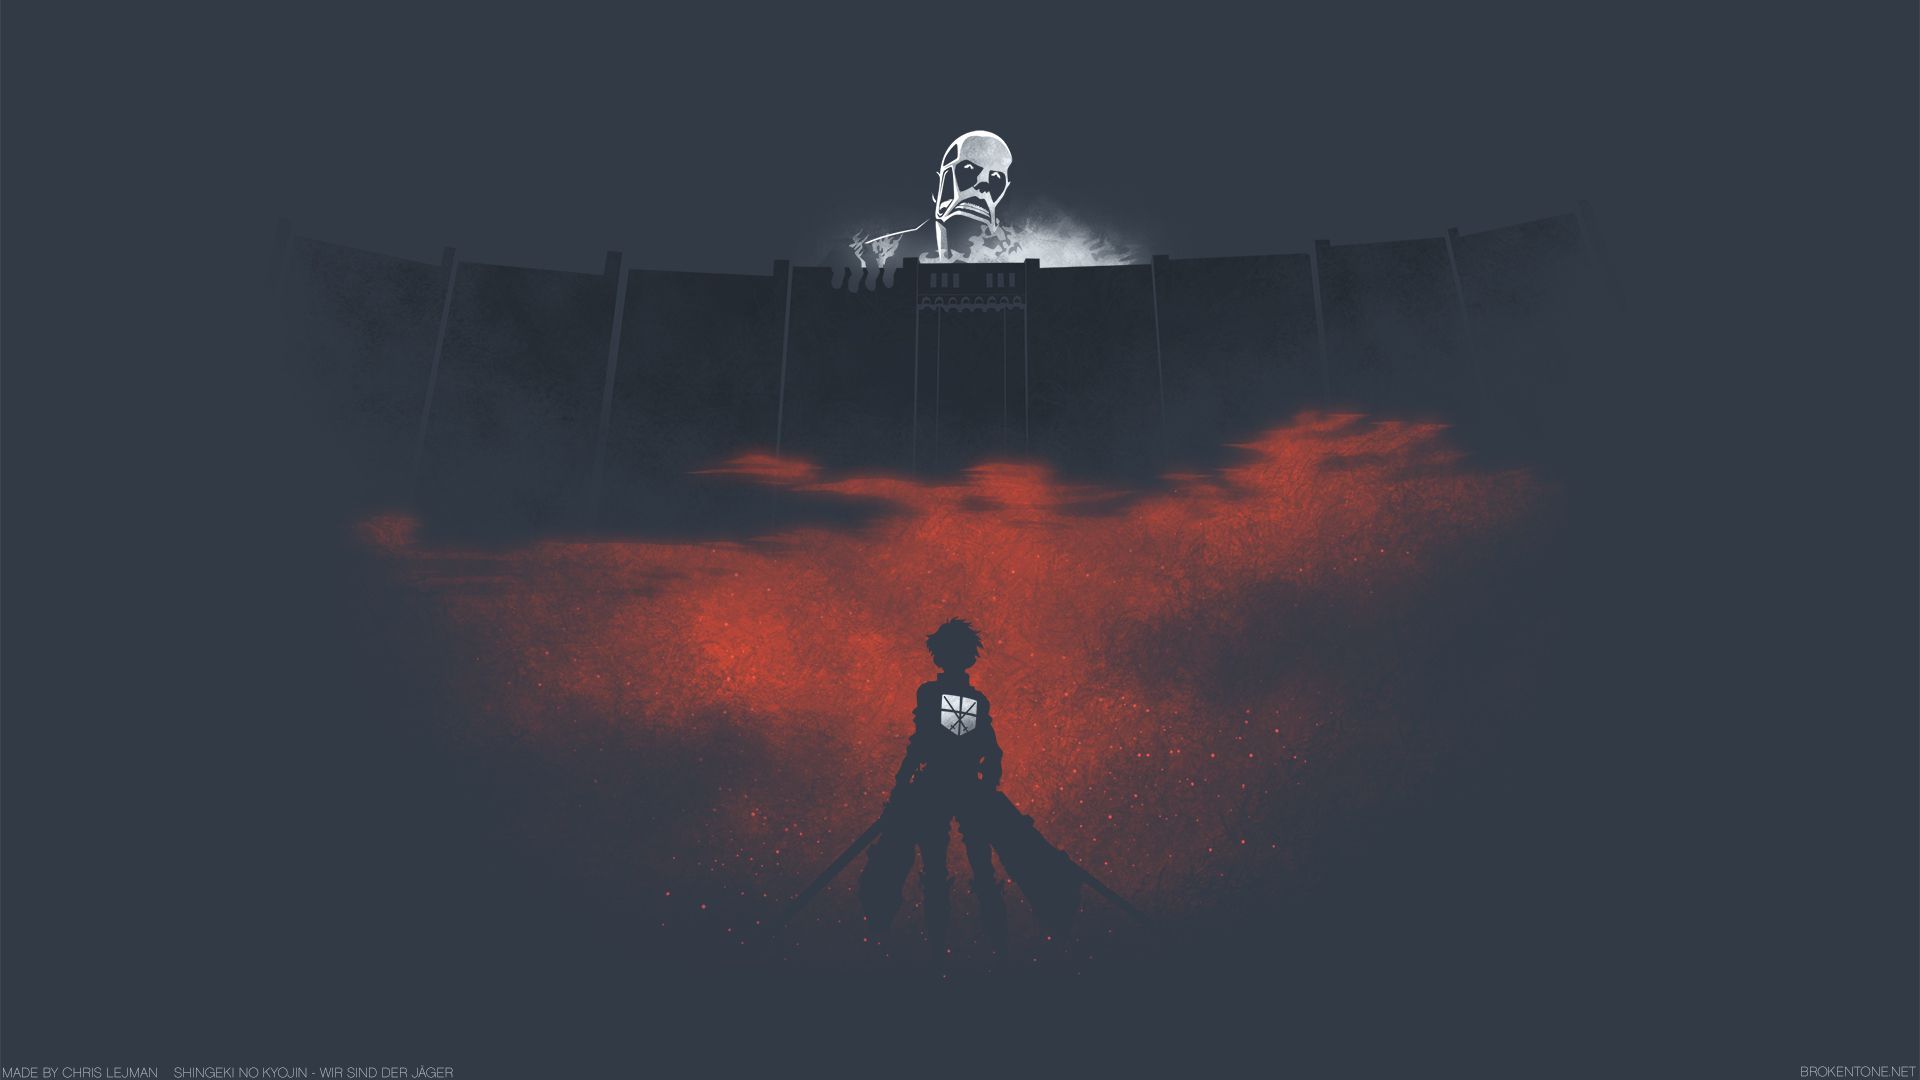 Attack on Titan wallpaper. Cool anime wallpaper, Reds poster